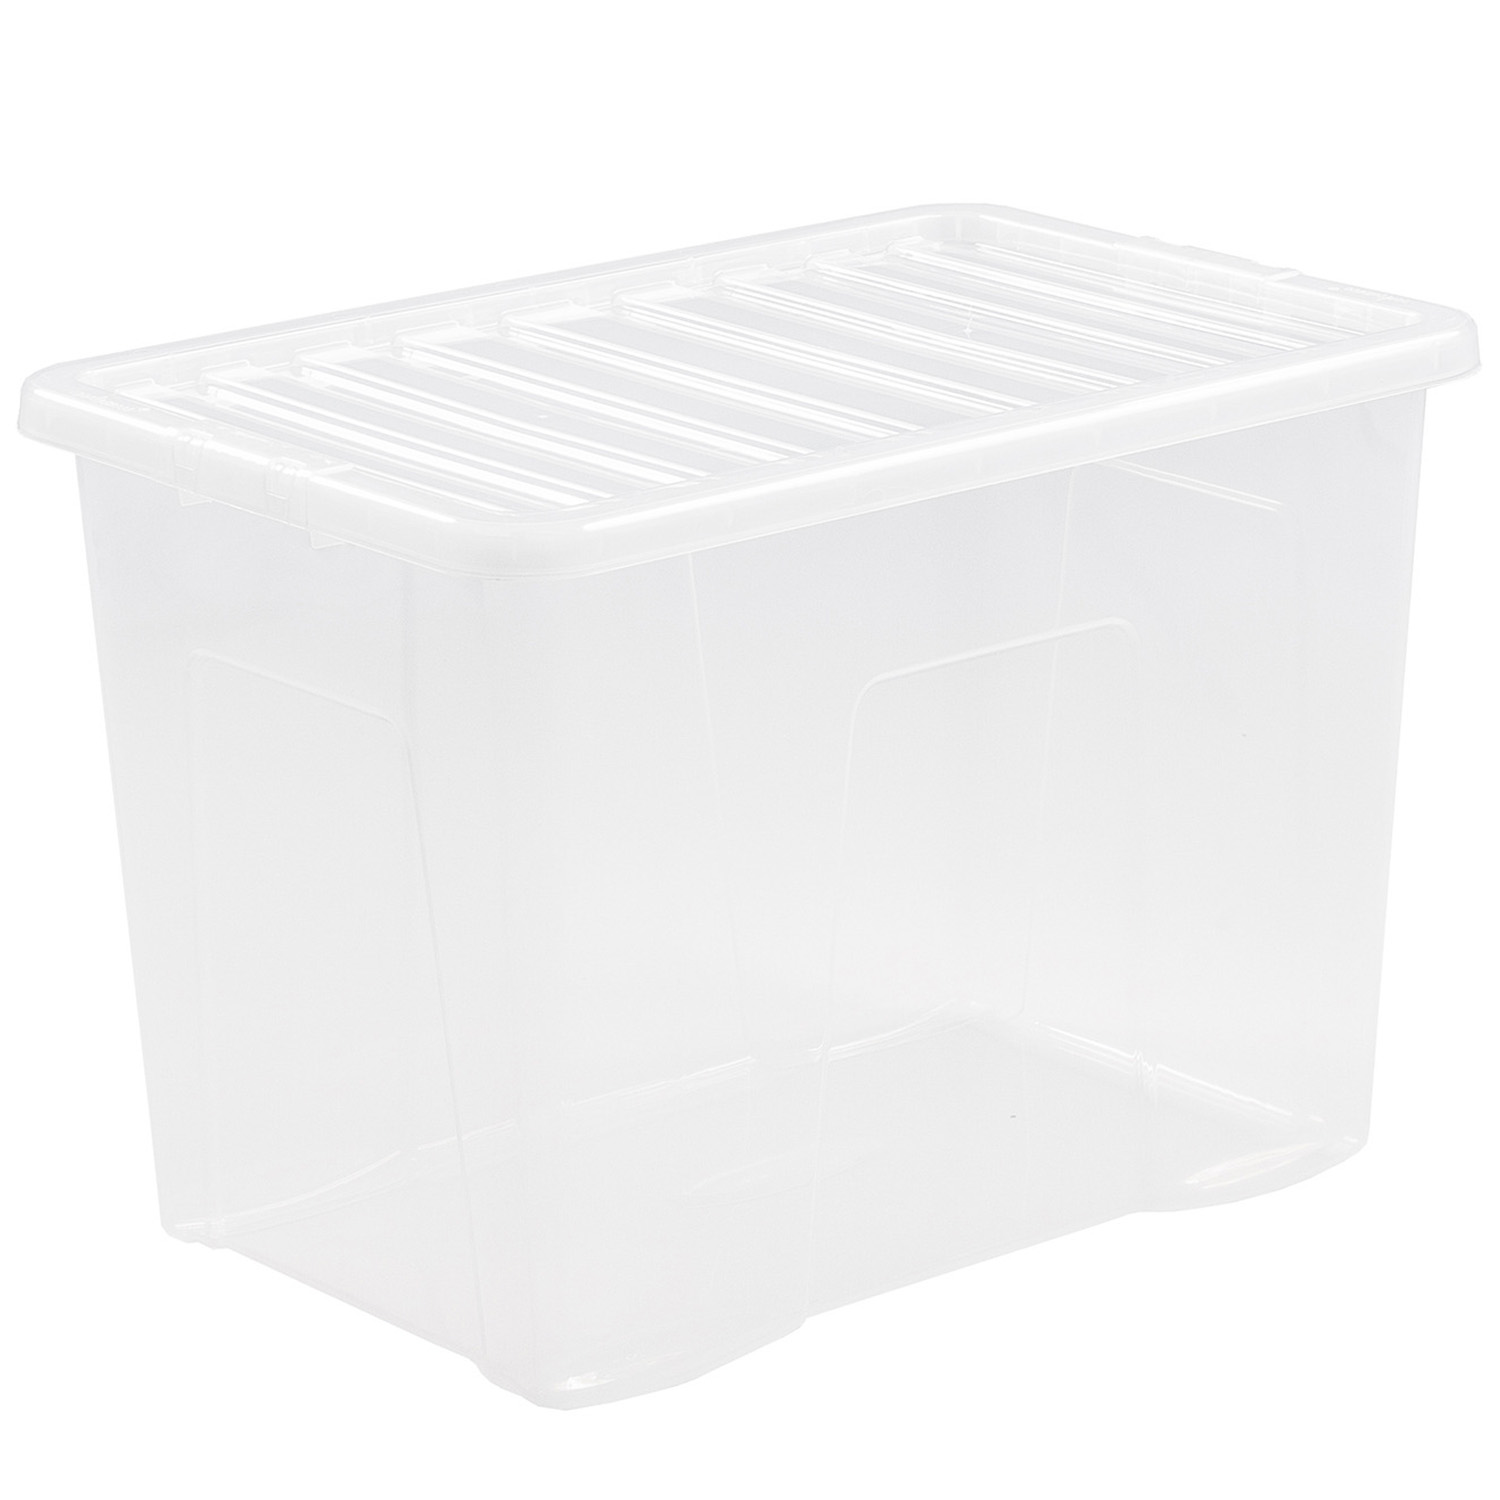 Wham 80L Plastic Clear Storage Box with Lid Image